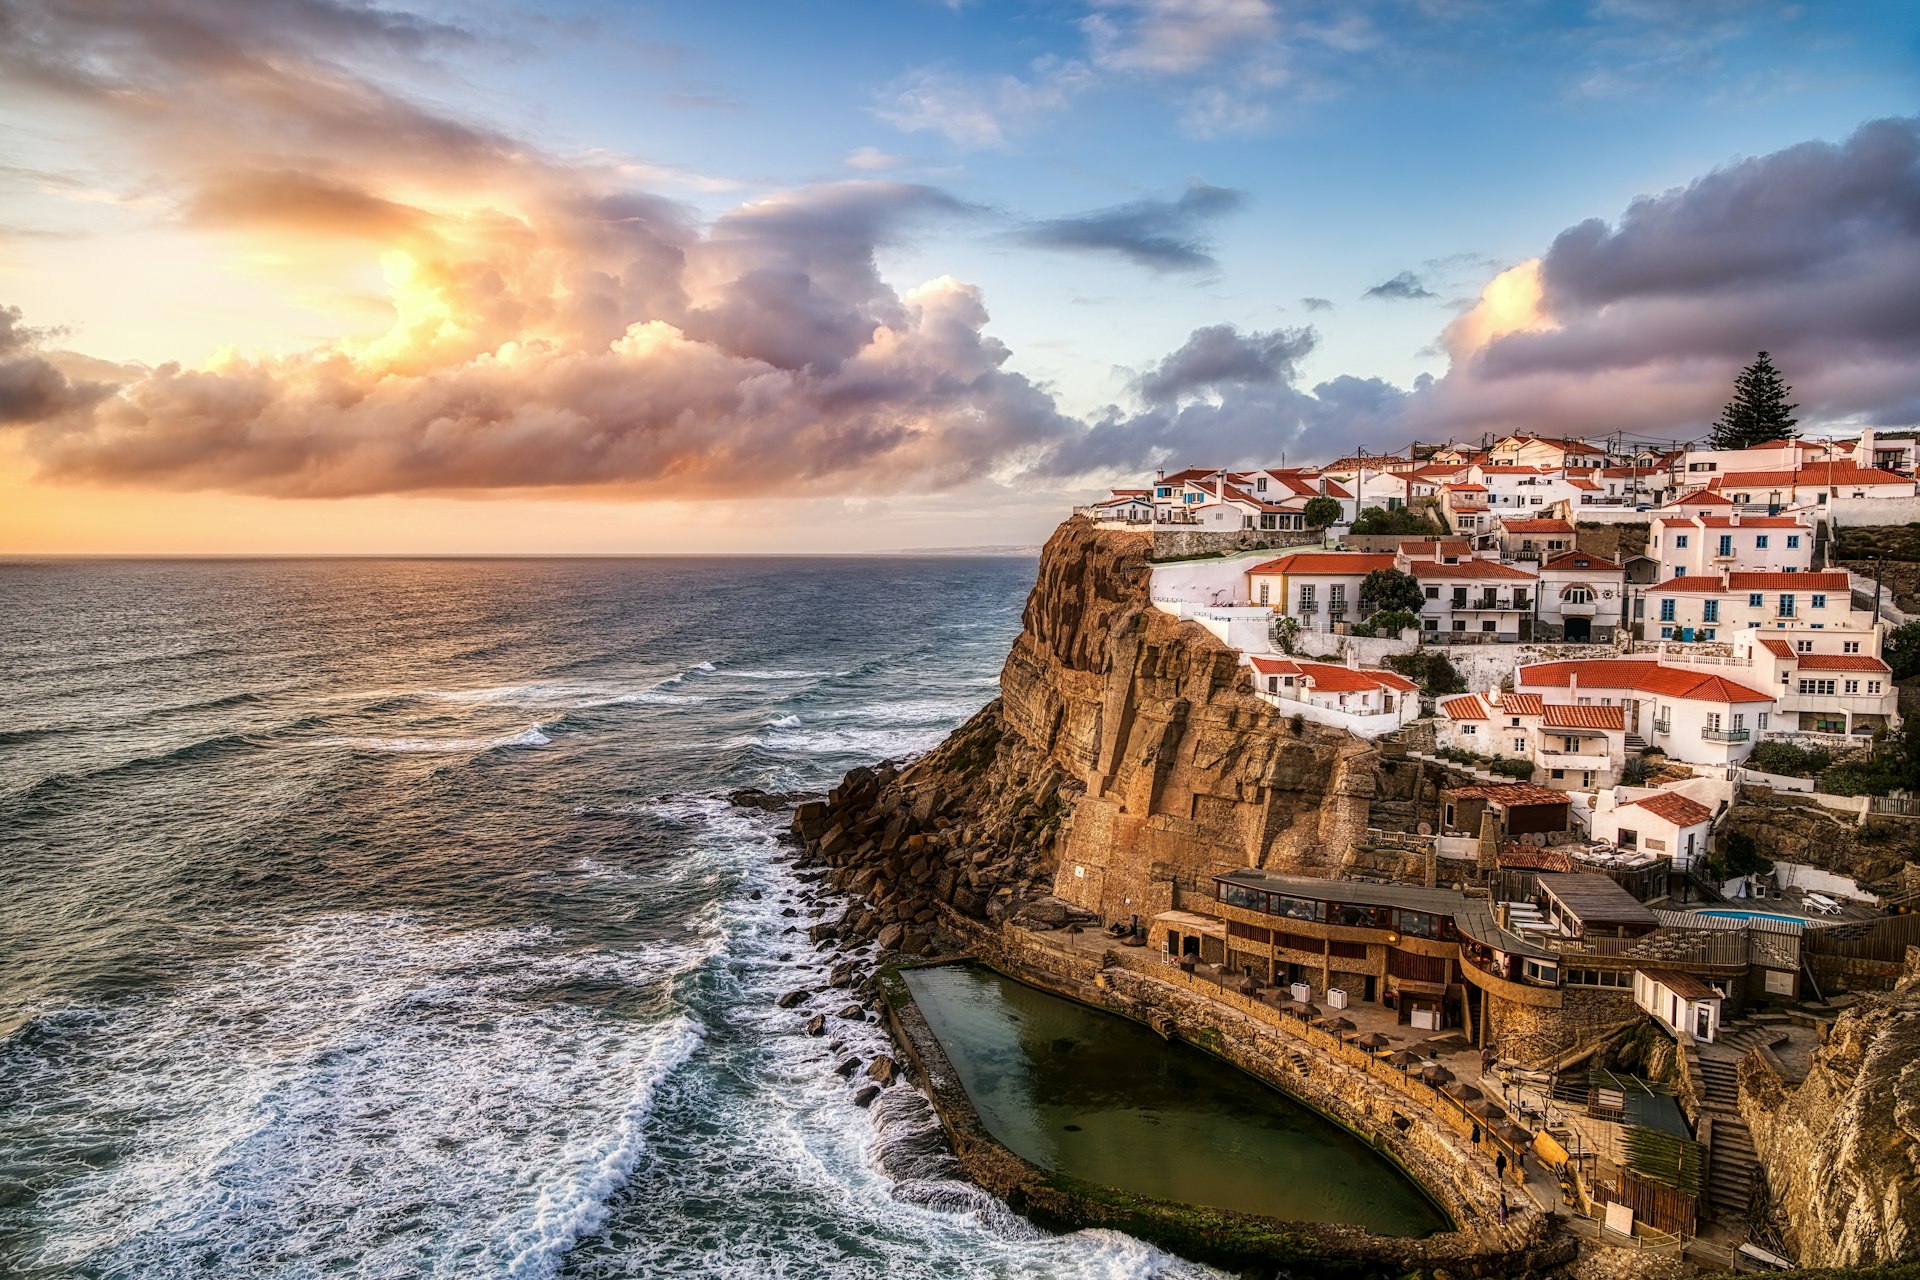 A cliffside view of white houses along a craggy coastline in Sintra at sunset